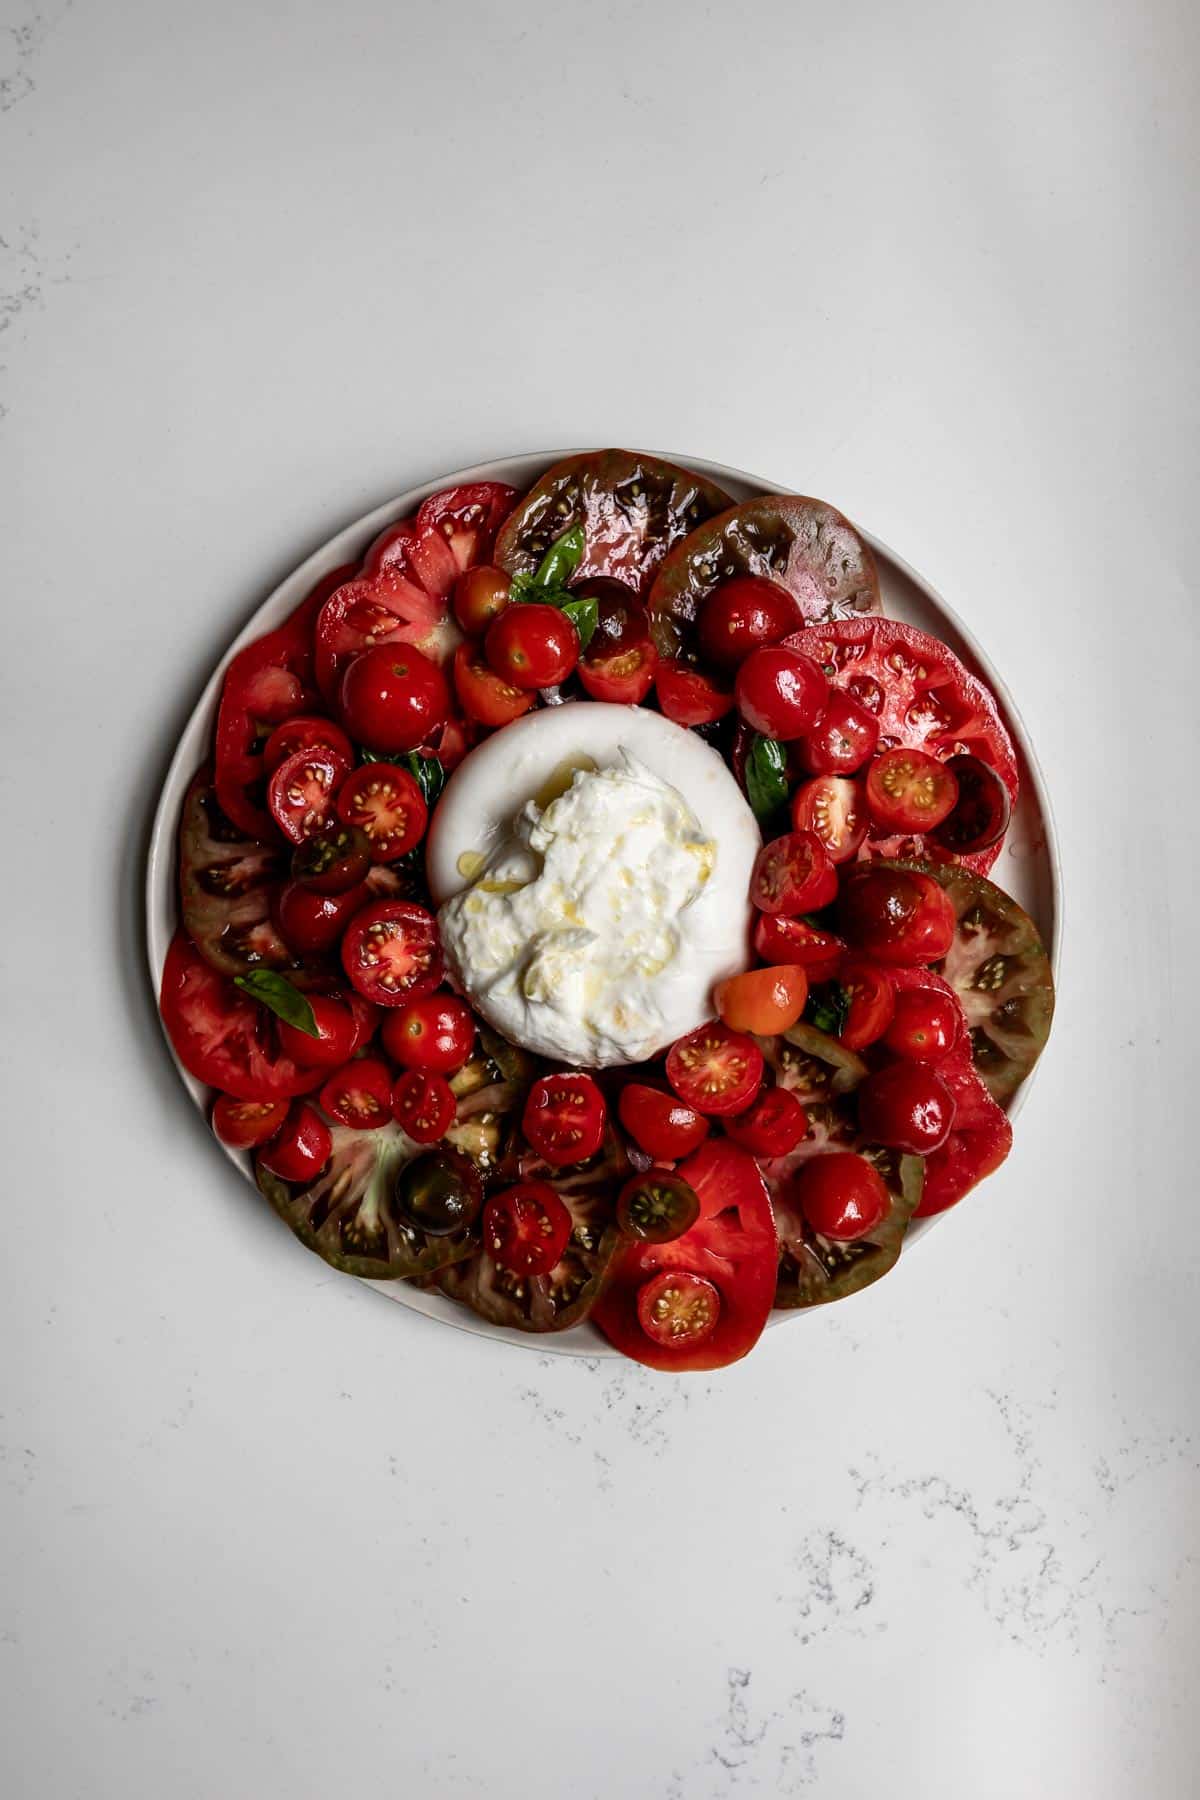 Ball of burrata cheese surrounded by sliced heirloom and grape tomatoes on a white plate with white marble background.